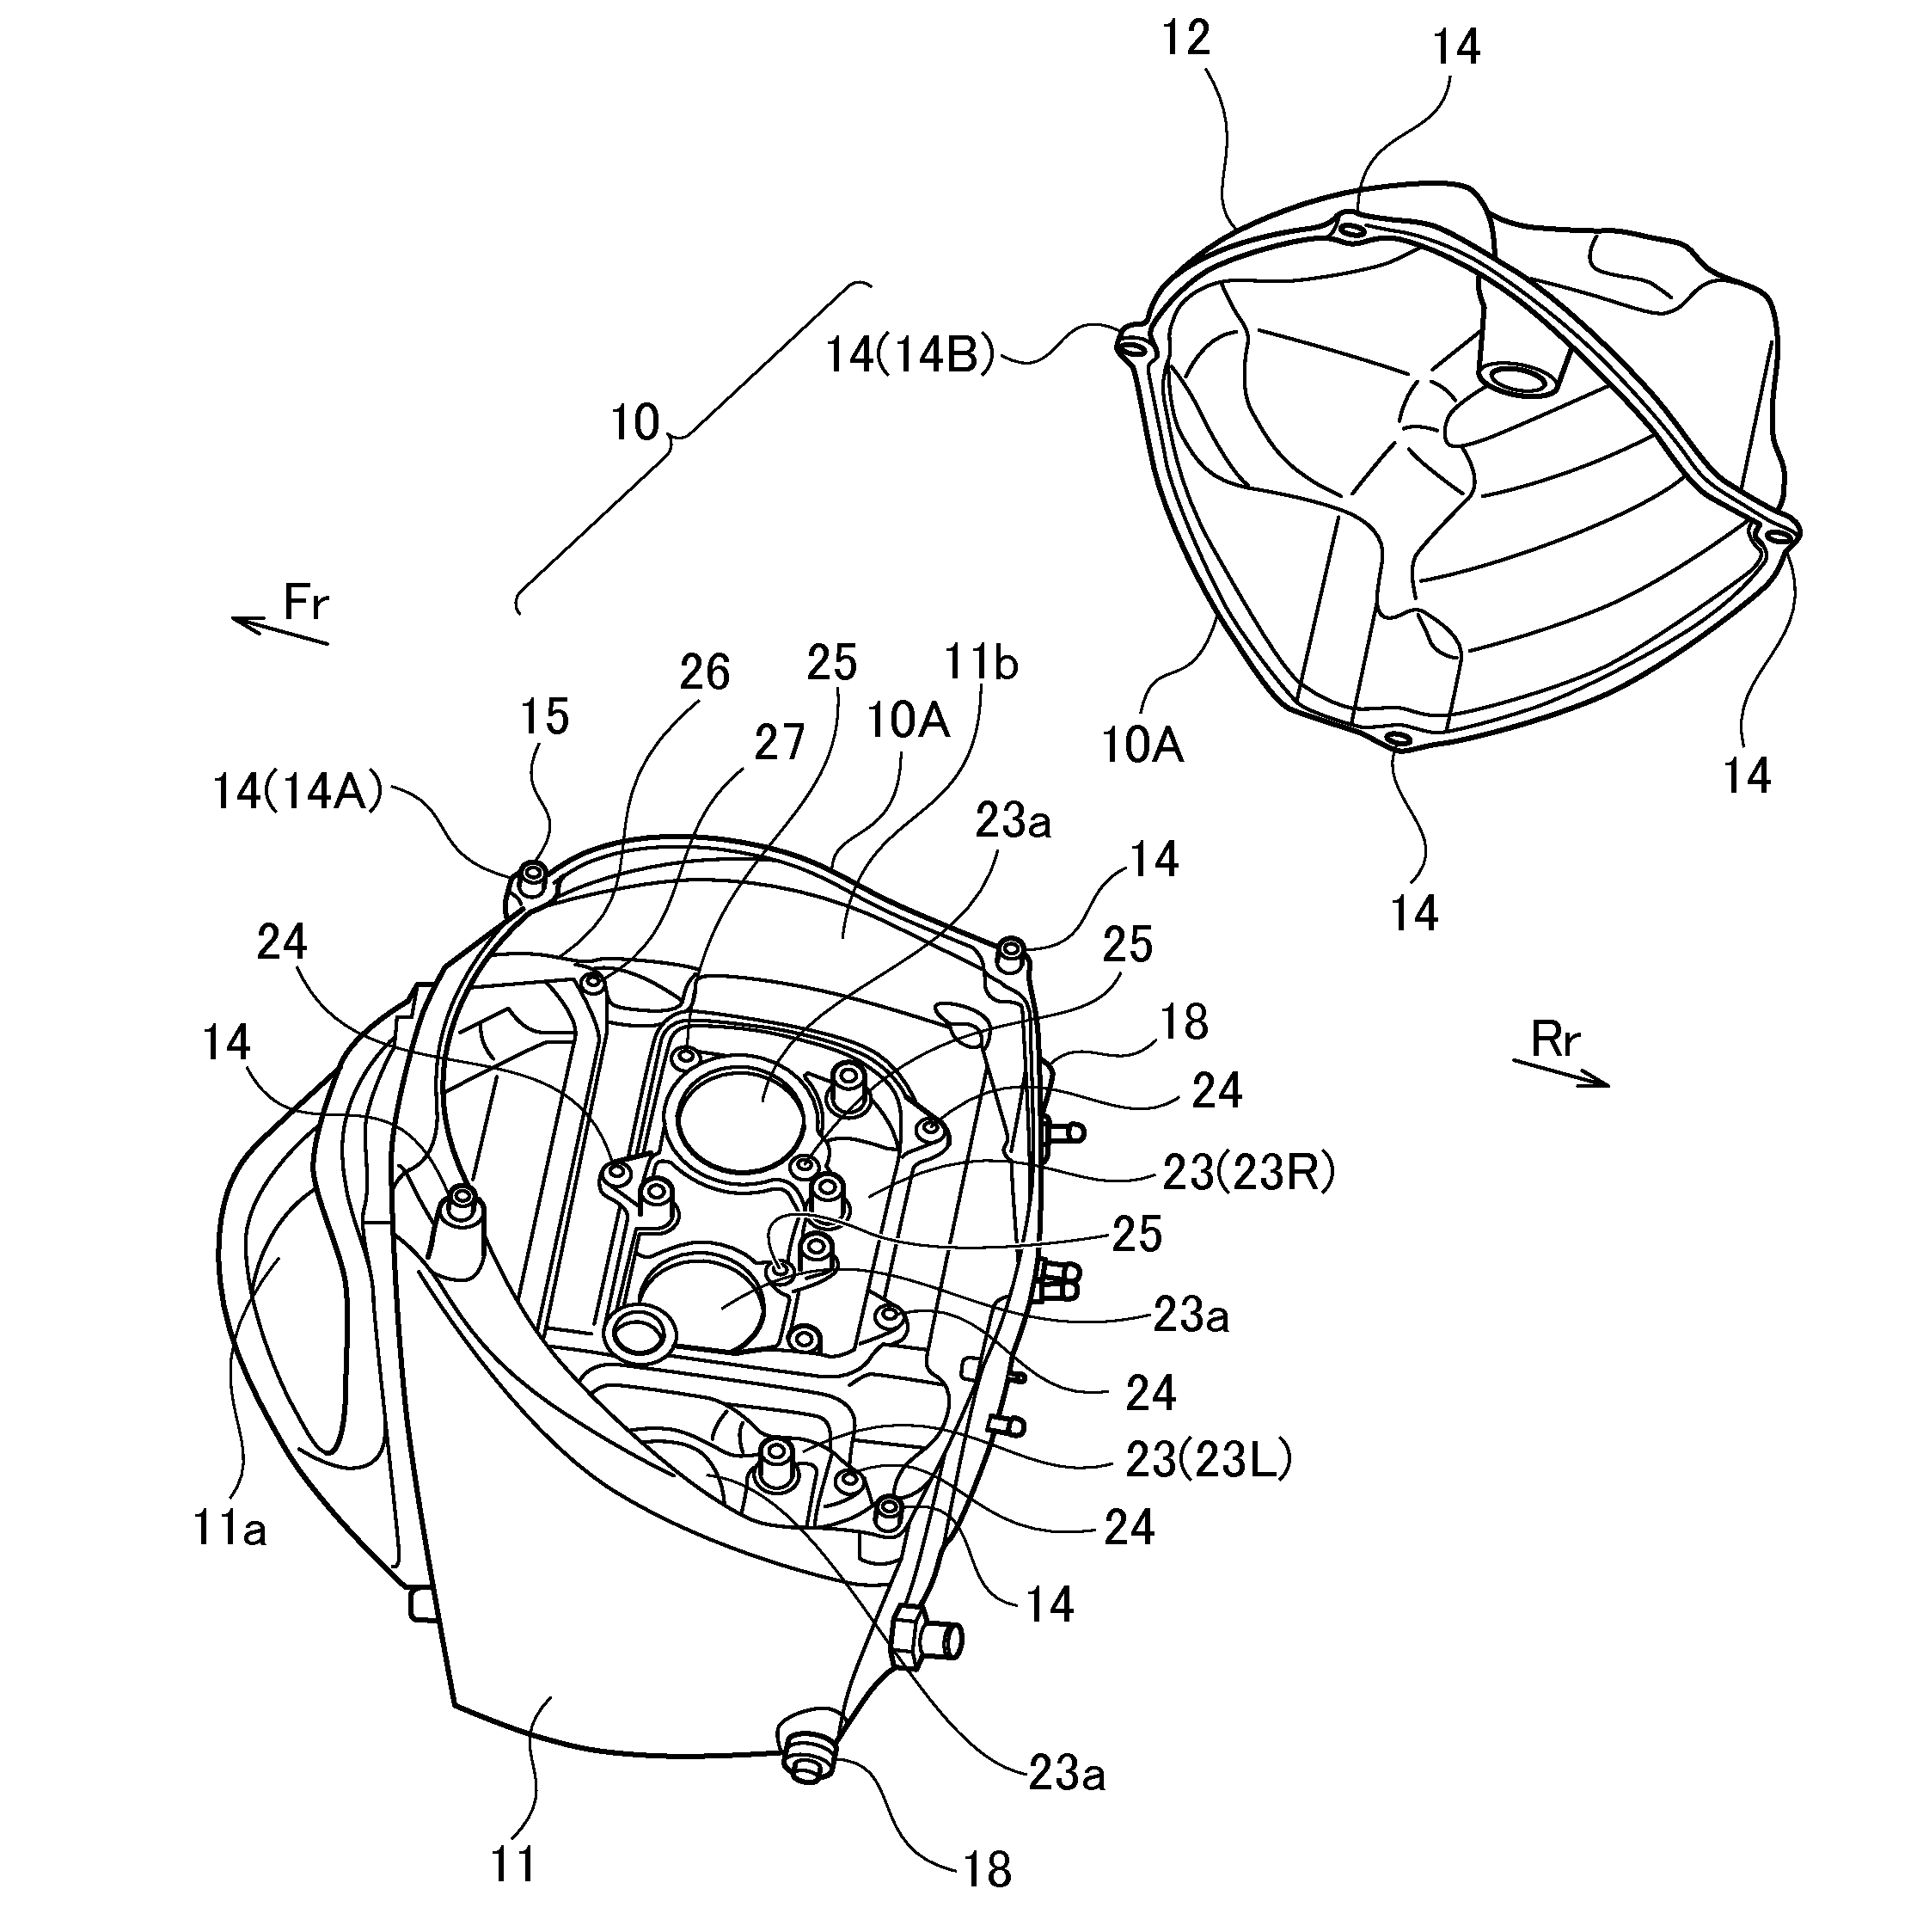 Air cleaner structure of motorcycle